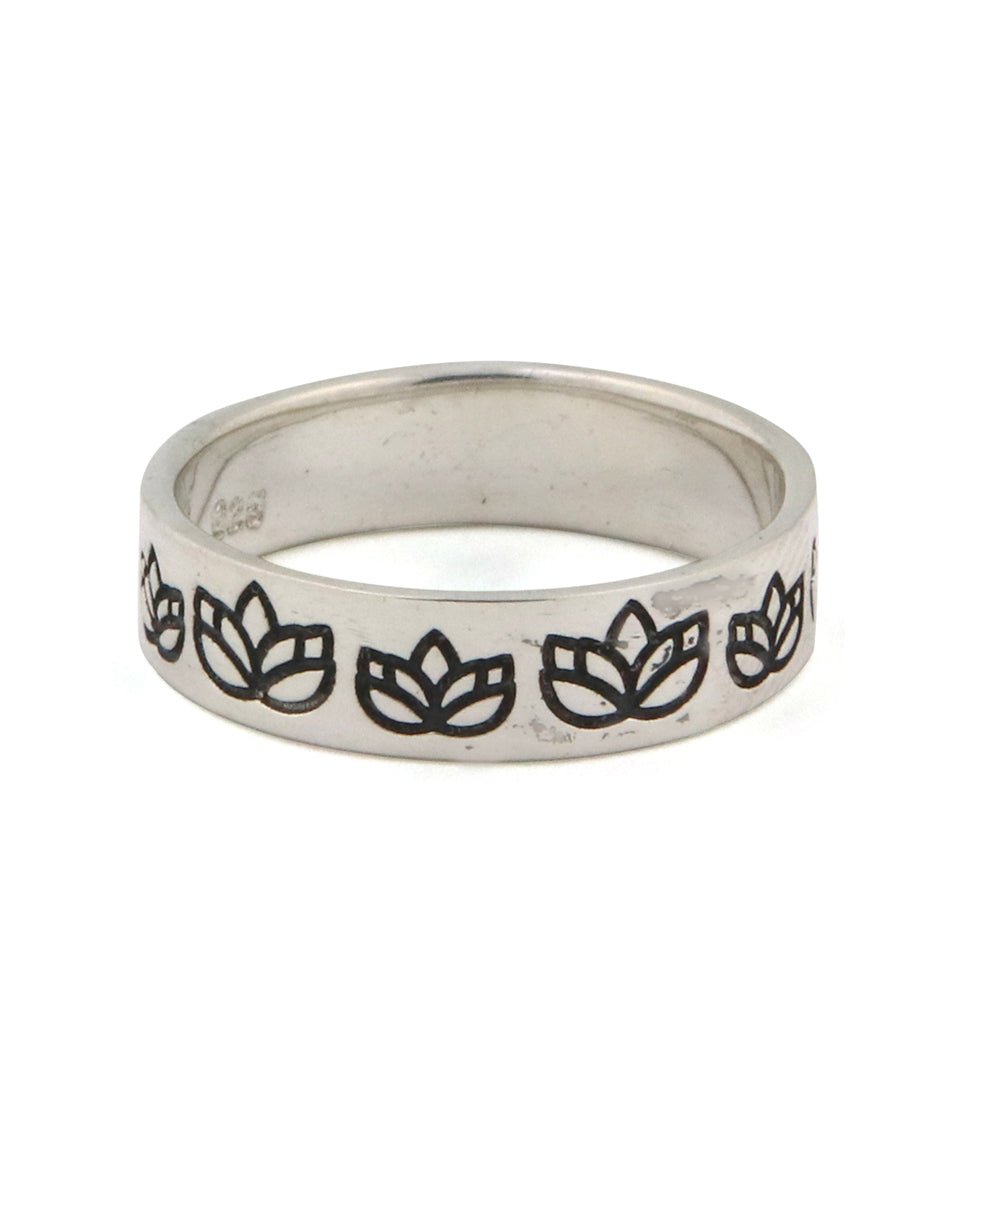 Lotus Design Sized Sterling Silver Band Rings - Rings Size 6